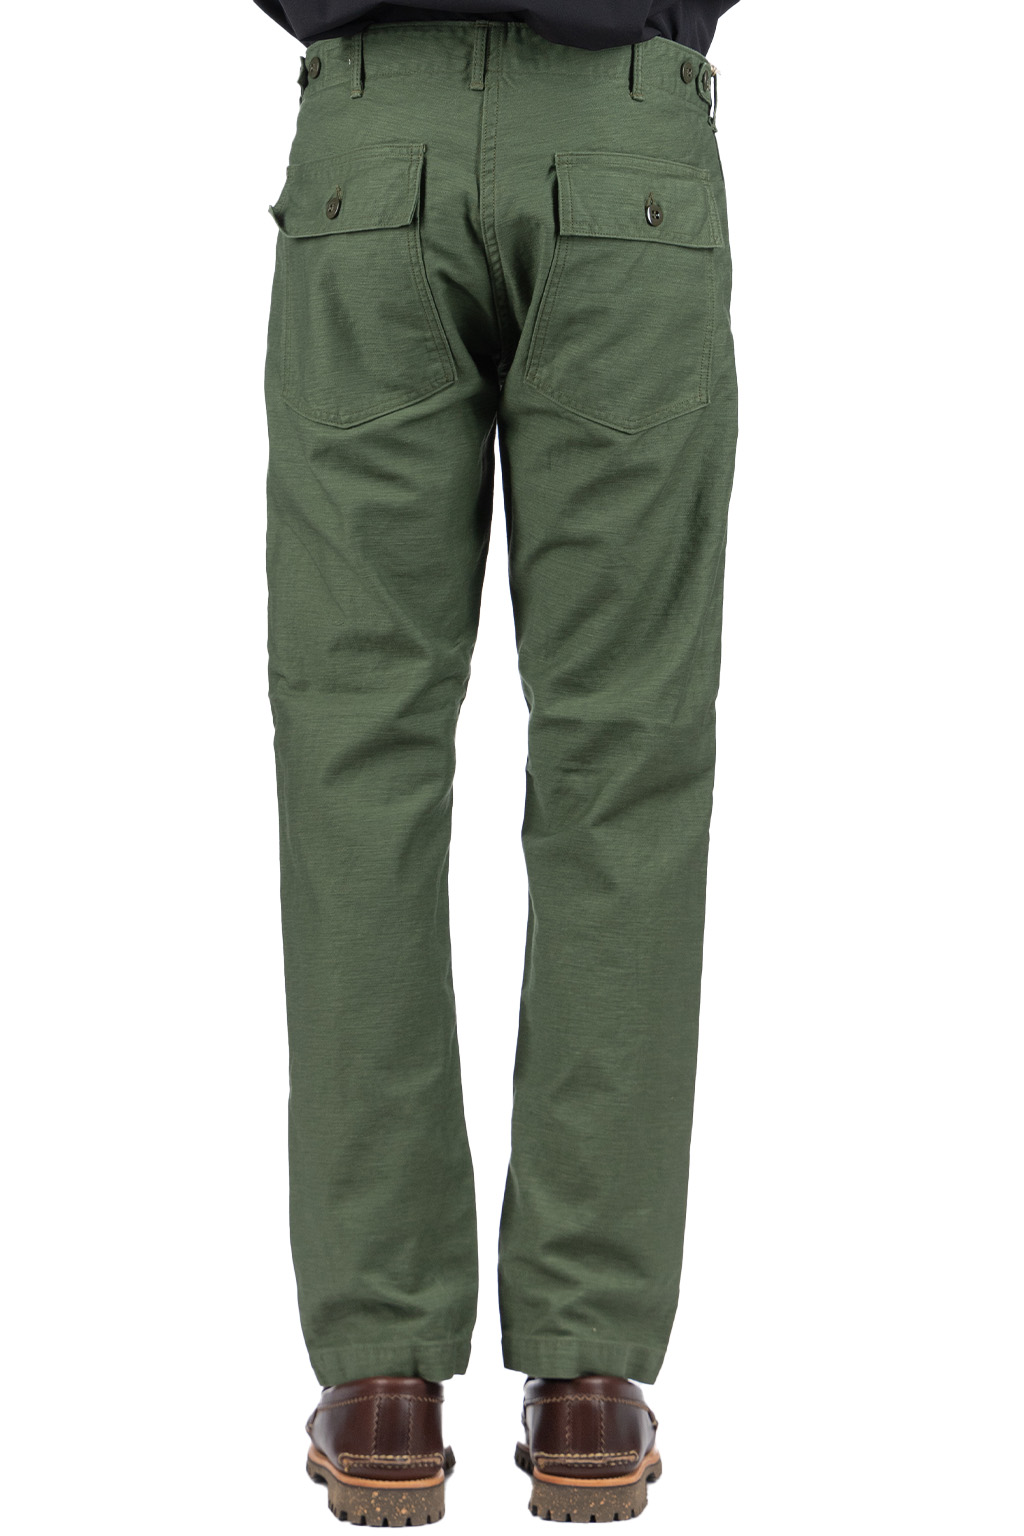 Orslow Slim Fit Fatigue Pants Green 16 - Made in Japan